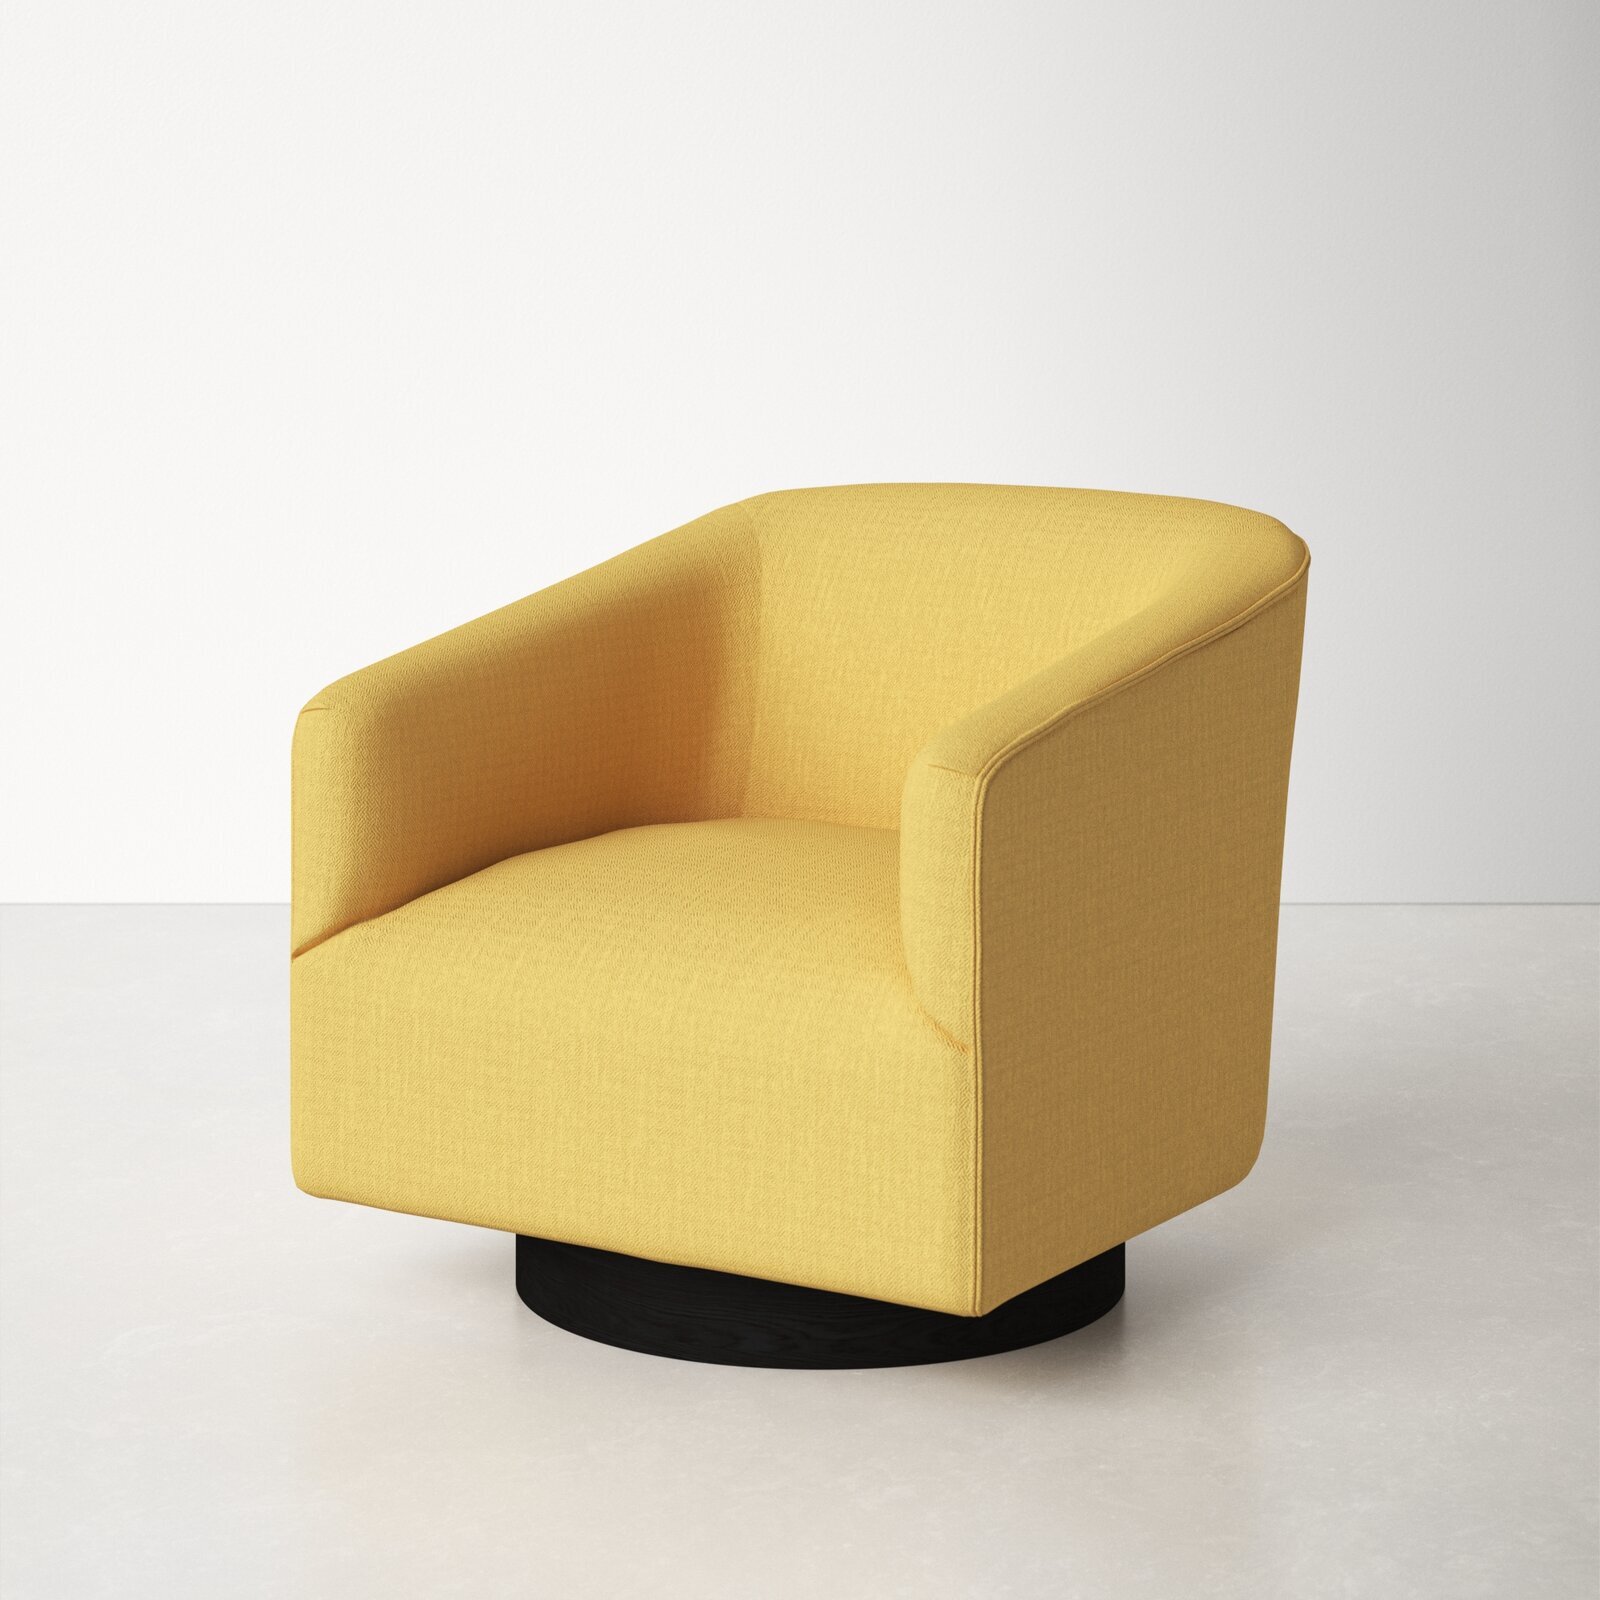 A half back oversized round swivel chair